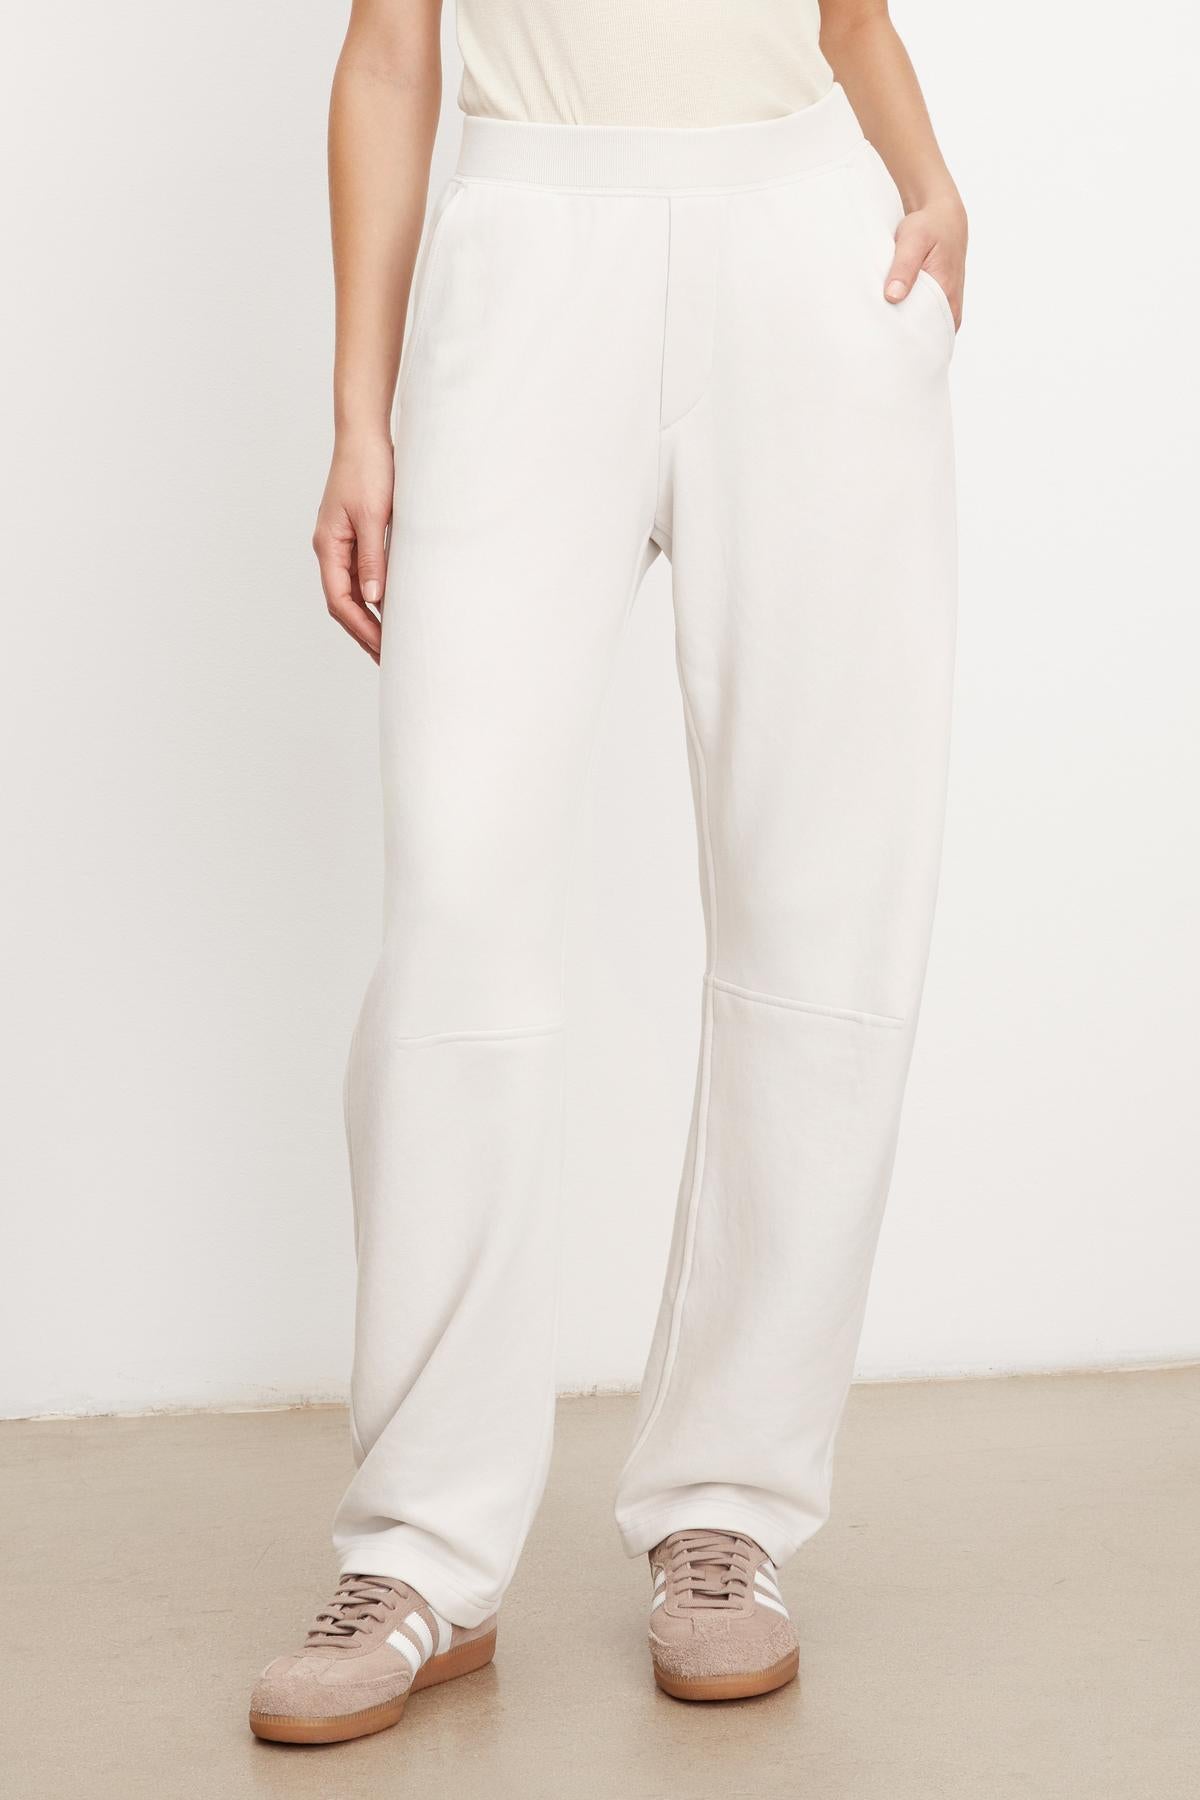 A woman wearing Velvet by Graham & Spencer's MATTY SOFT FLEECE SWEATPANT and a white tee.-35696184197313